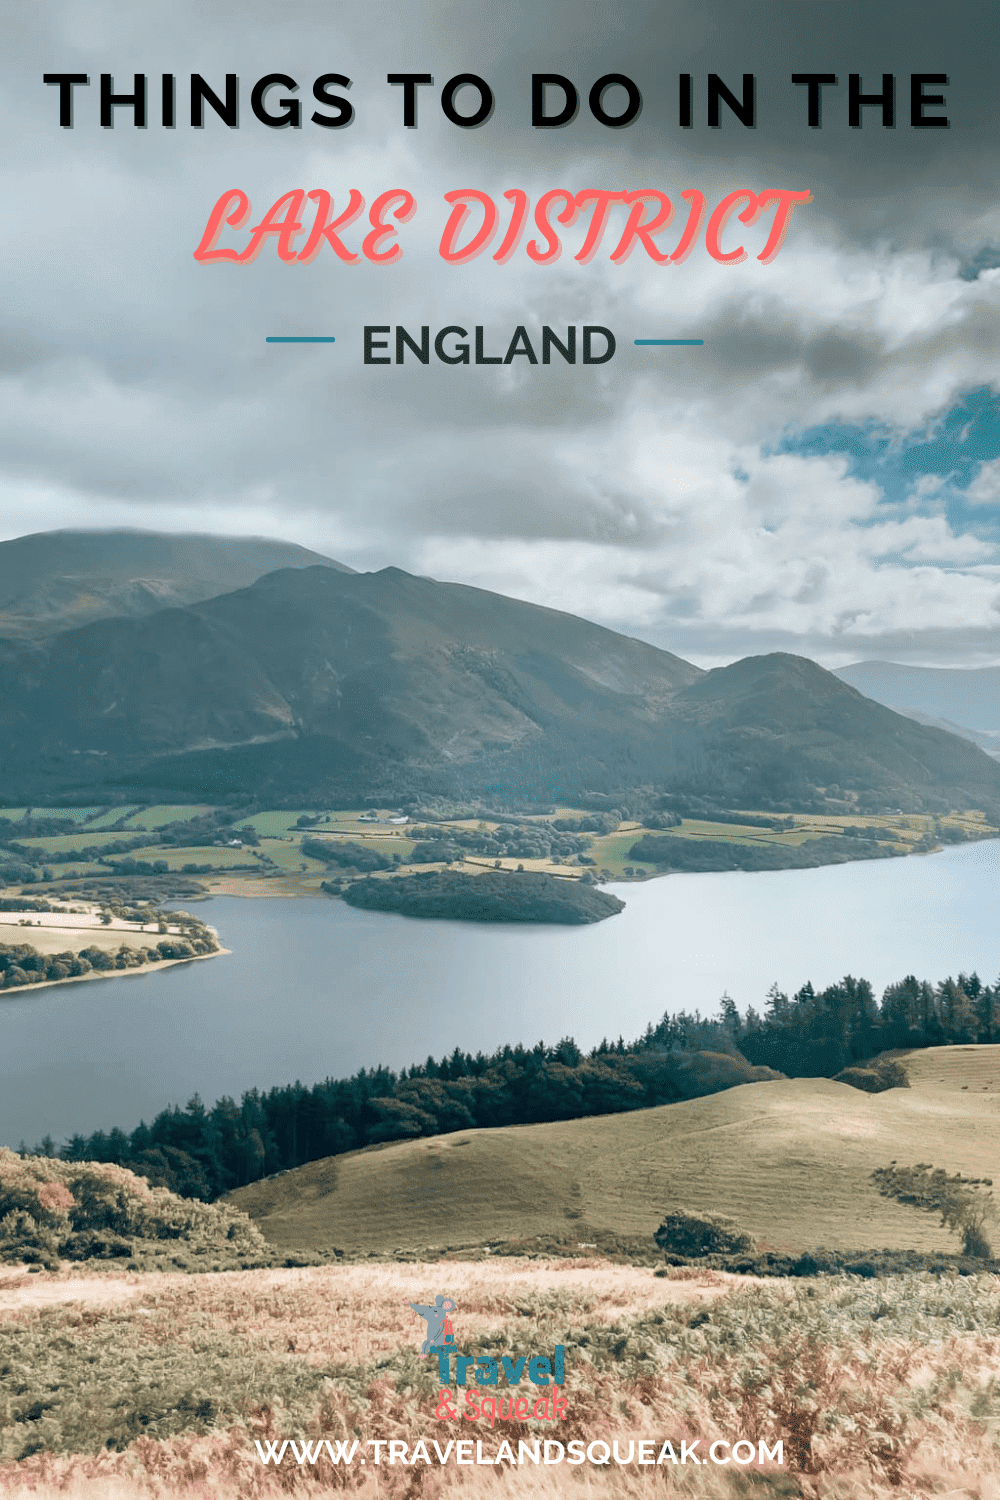 8 Things to do in the Lake District: Complete Guide - Travel and Squeak